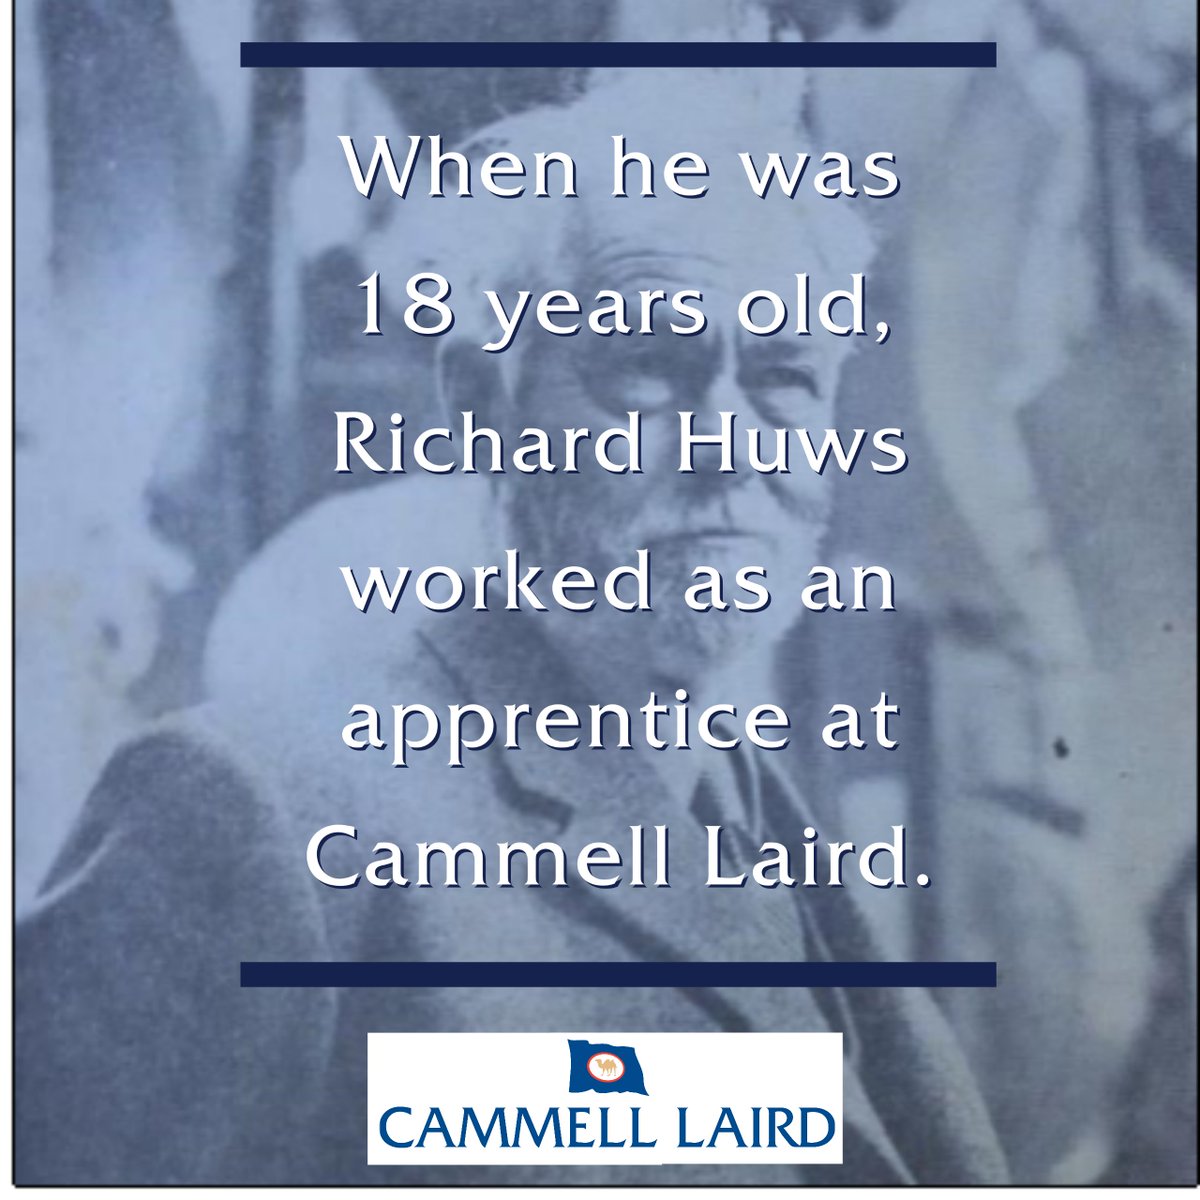 #DidYouKnow Richard Huws worked as an apprentice at Cammell Laird Shipyard between 1920 and 1922. #CammellLairdInHistory @PiazzaFountain